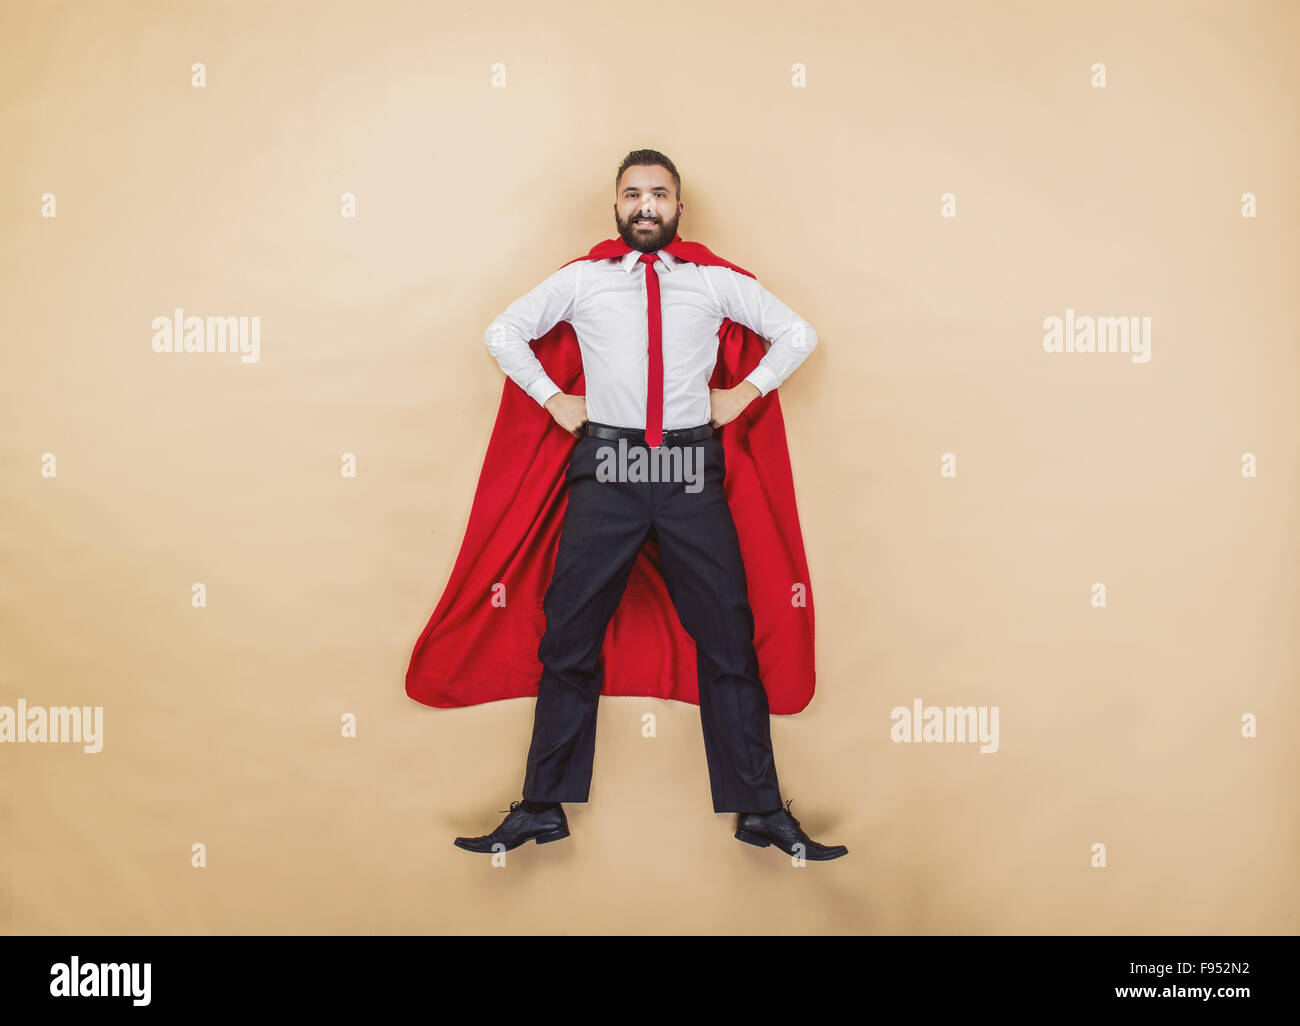 Manager wearing a red superman cloak. Studio shot on a beige background. Stock Photo